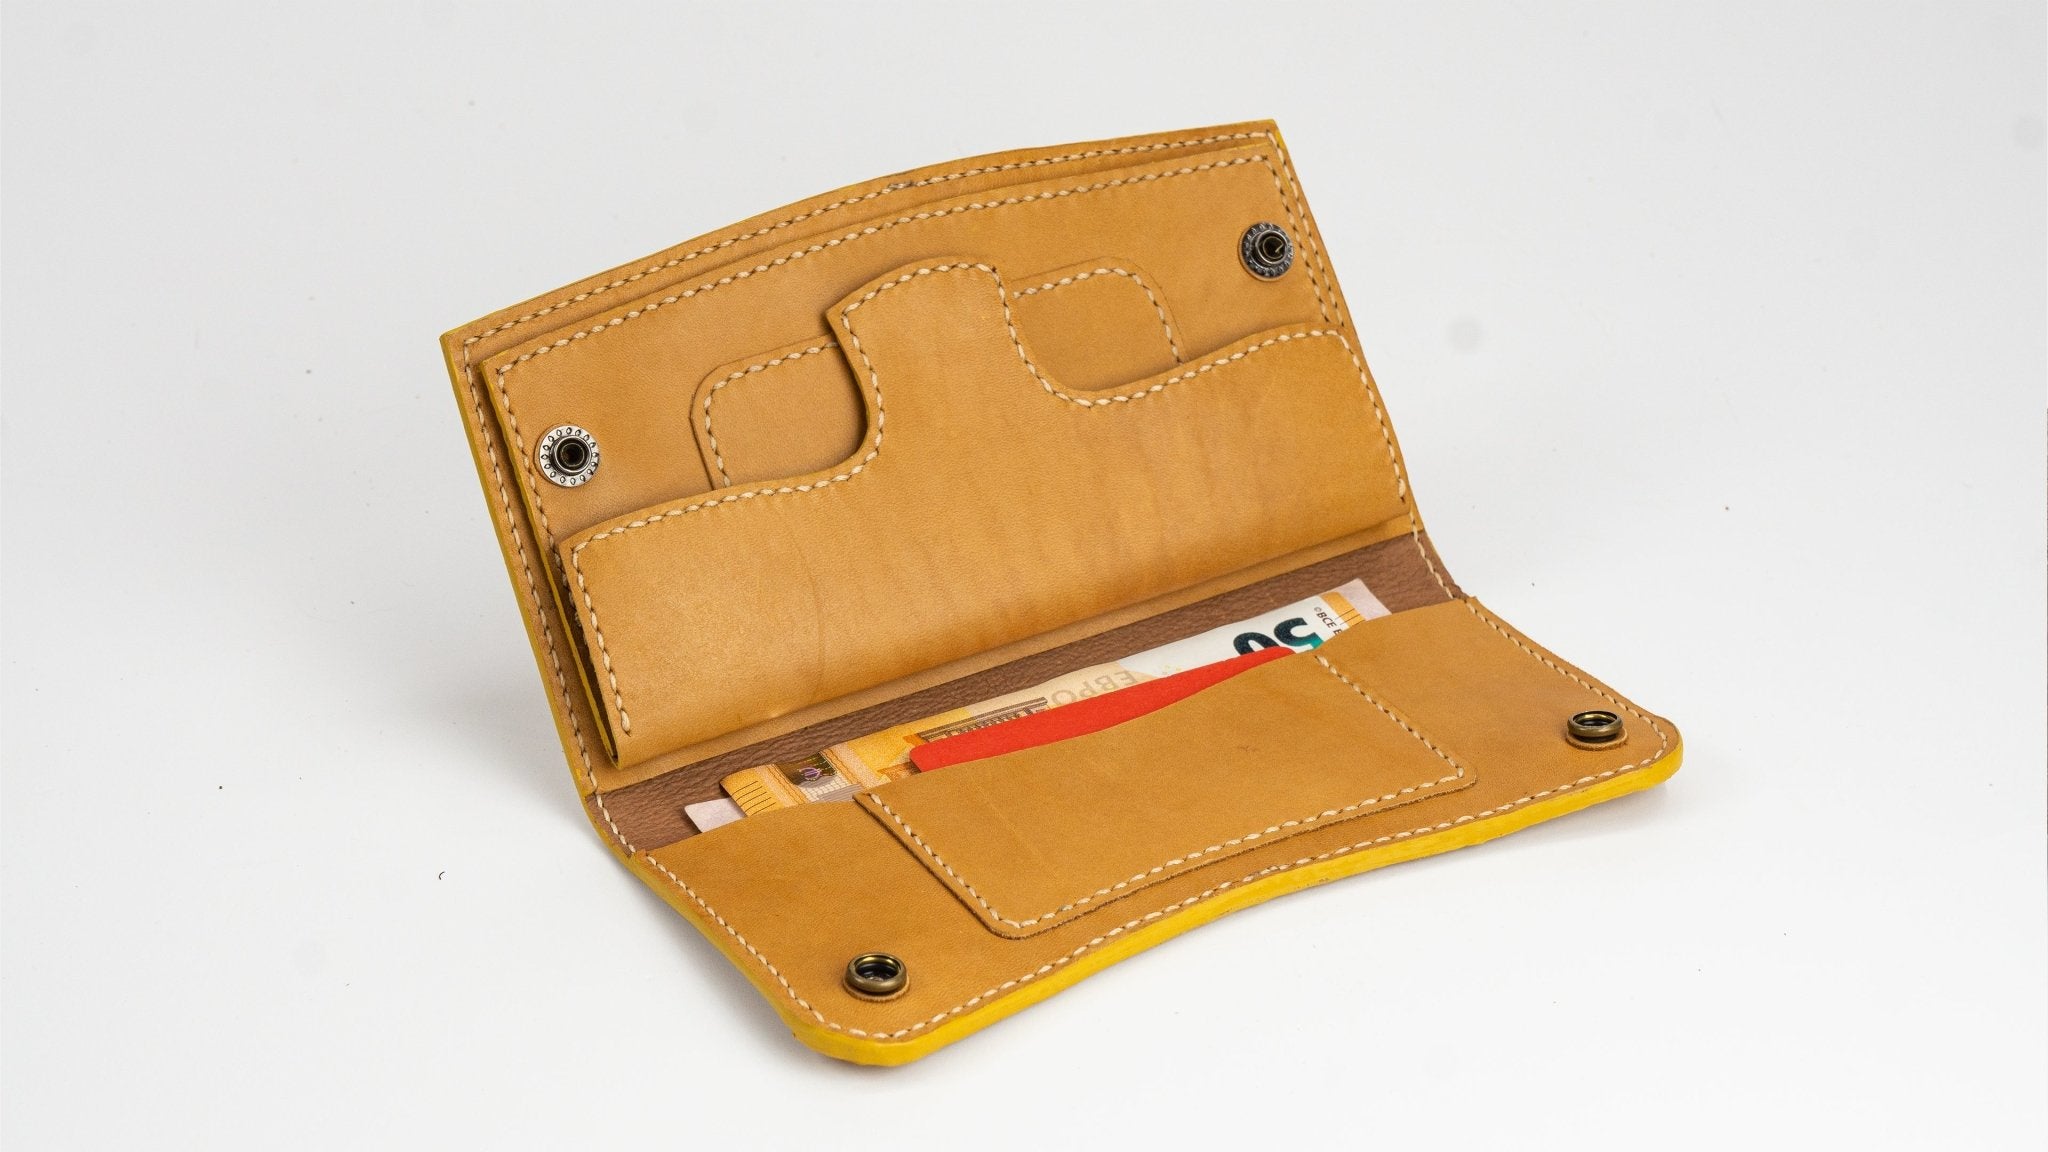 PDF Pattern and Instructional Video for Trucker Wallet No 6 - Vasile and Pavel Leather Patterns